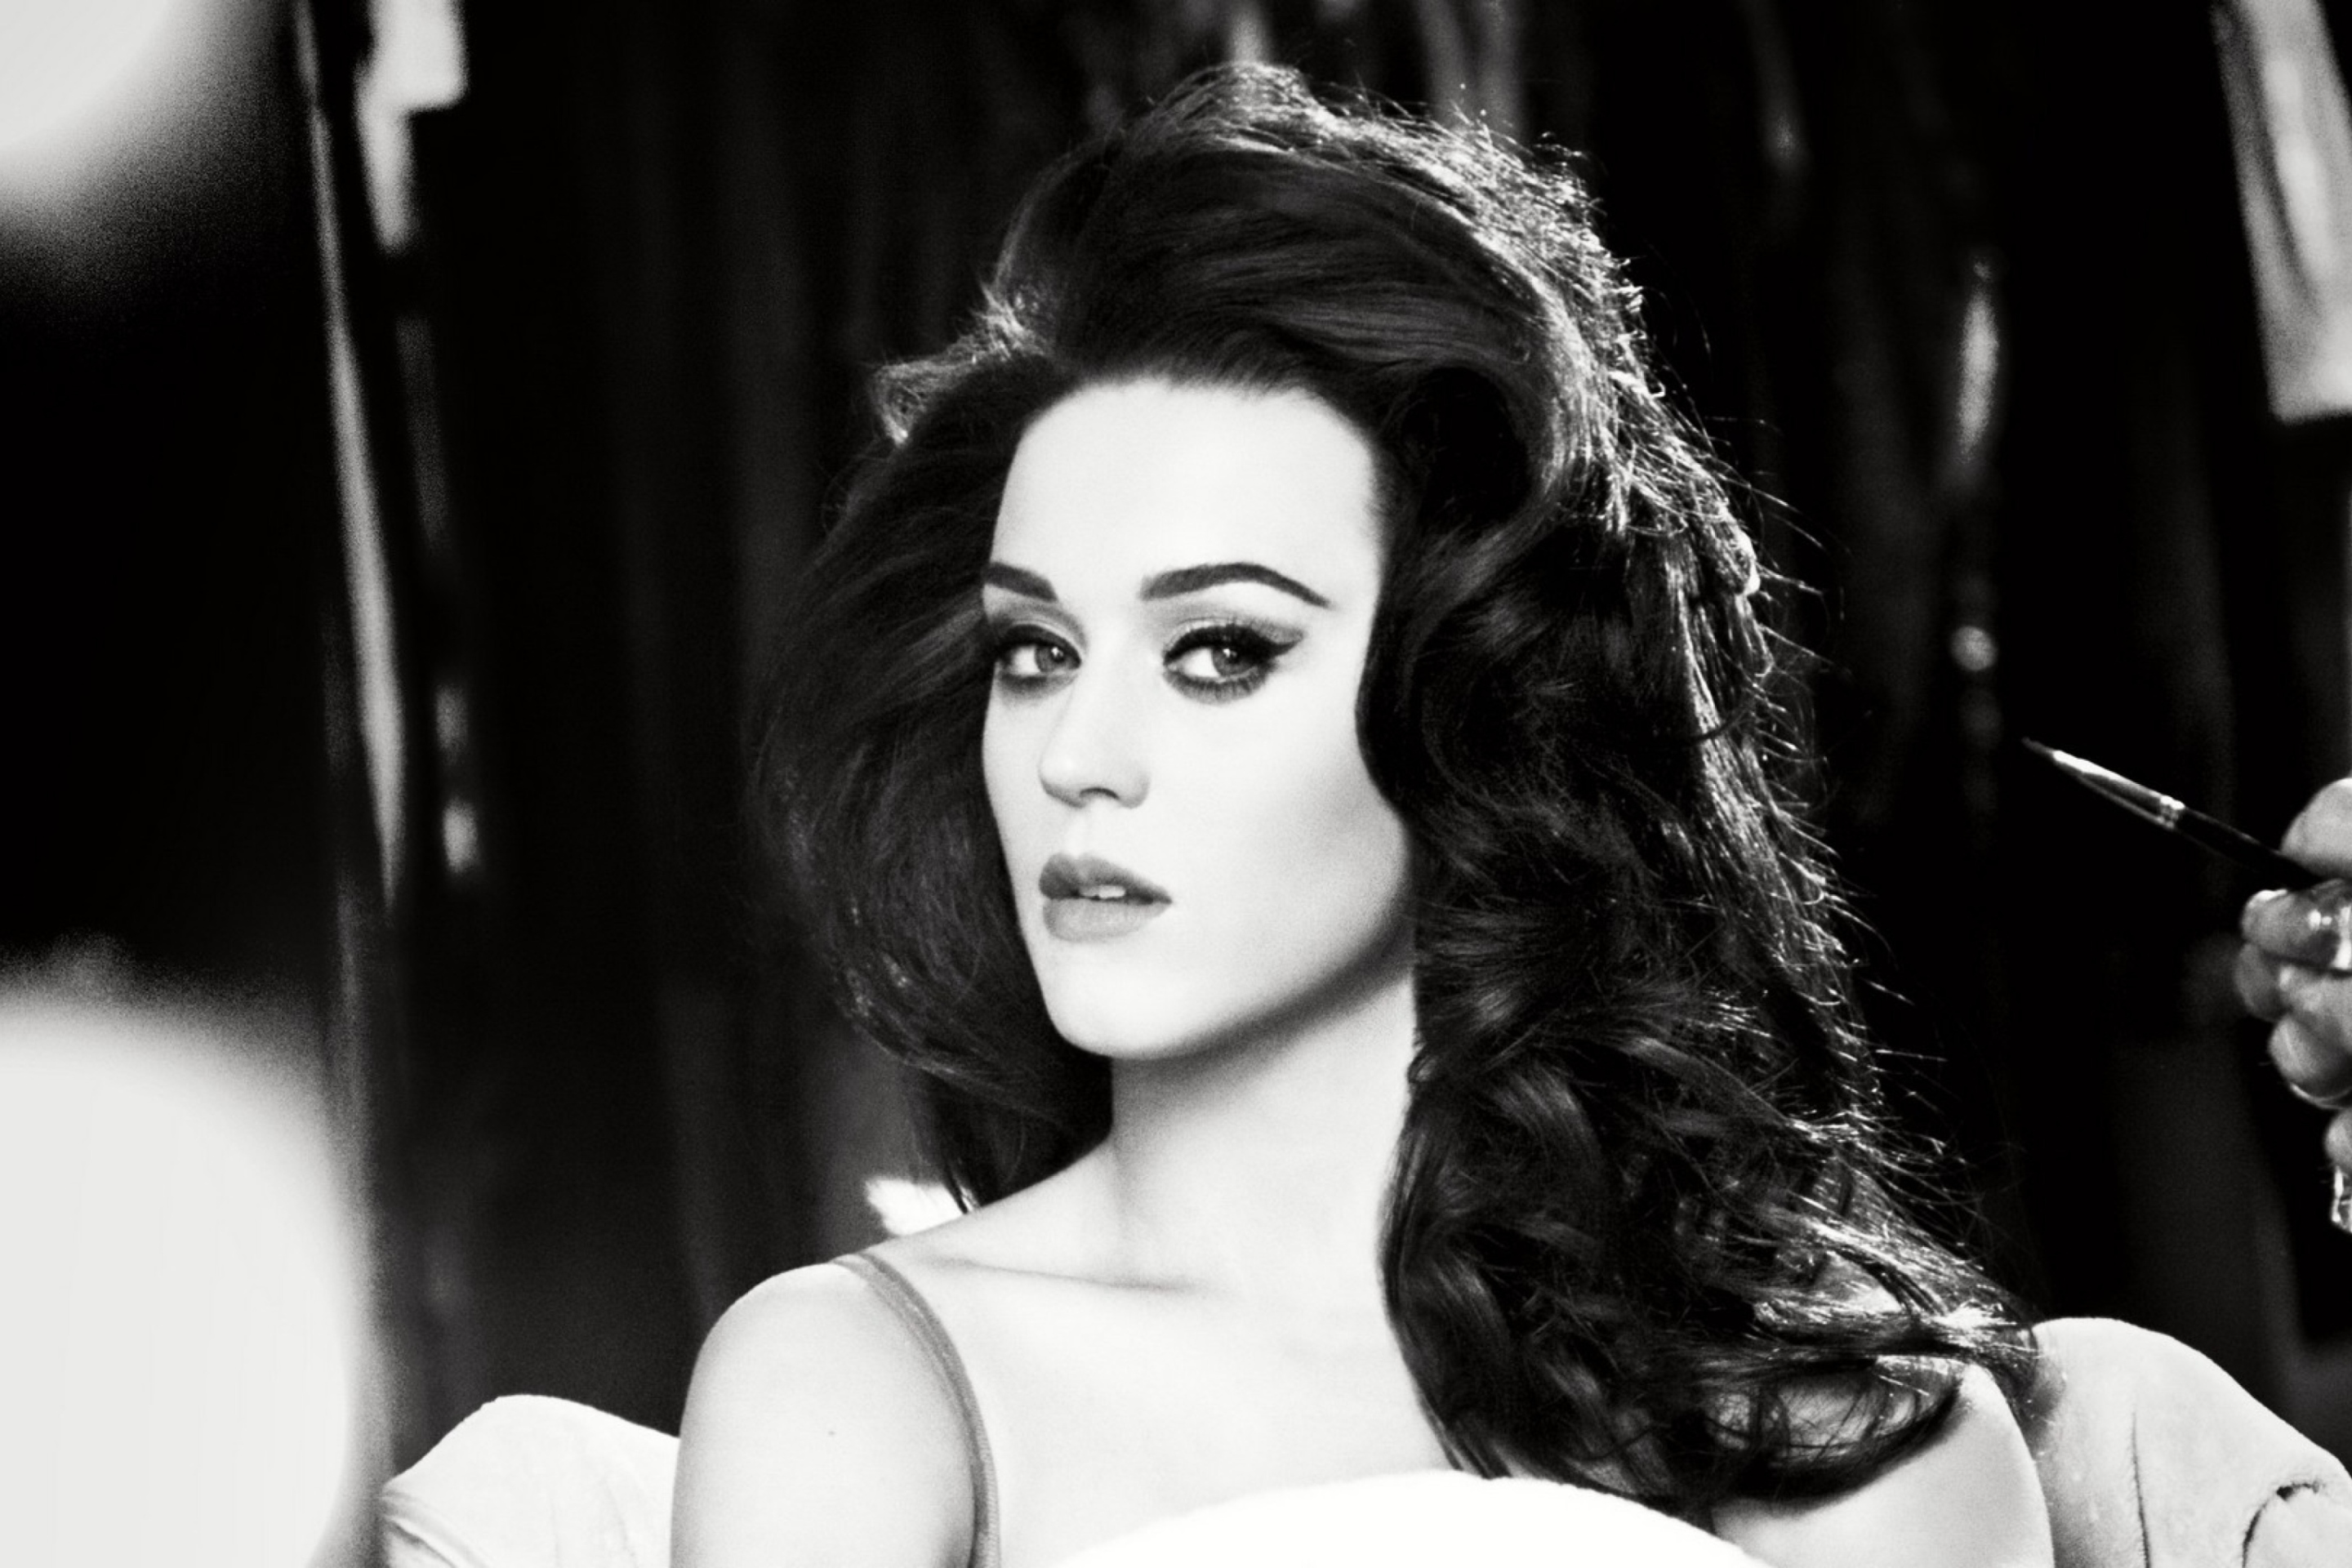 Katy Perry Black And White wallpaper 2880x1920